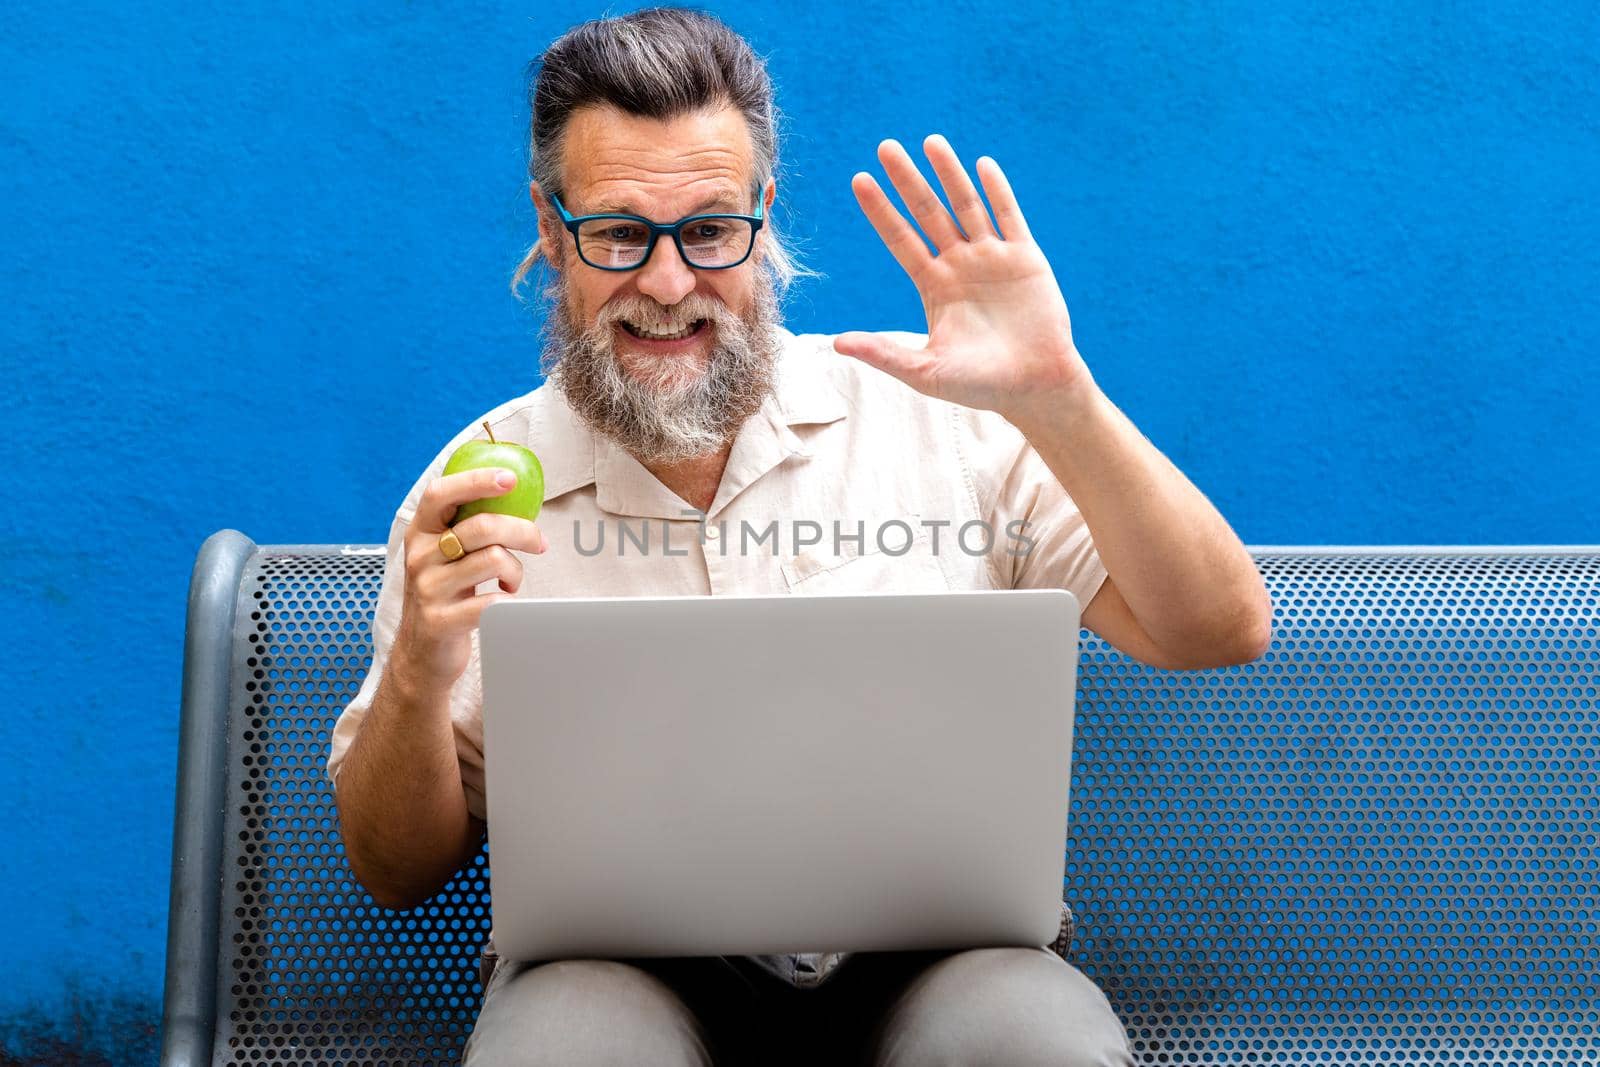 Mature caucasian man eating apple waving hello on a video call in park bench. Lifestyle and technology concepts.